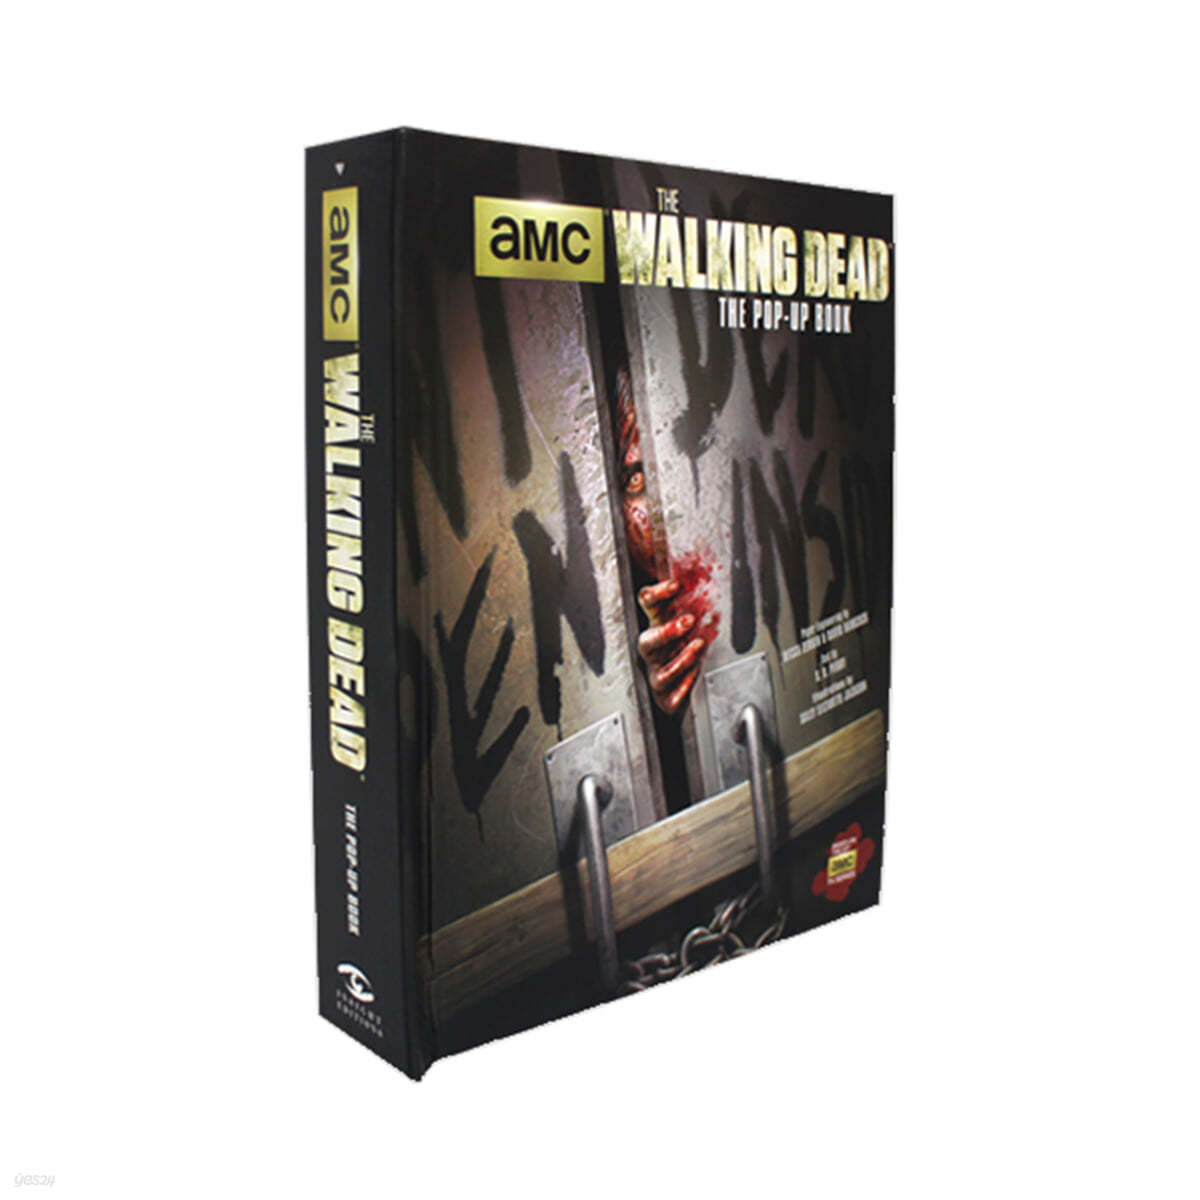 The Walking Dead: The Pop-Up Book